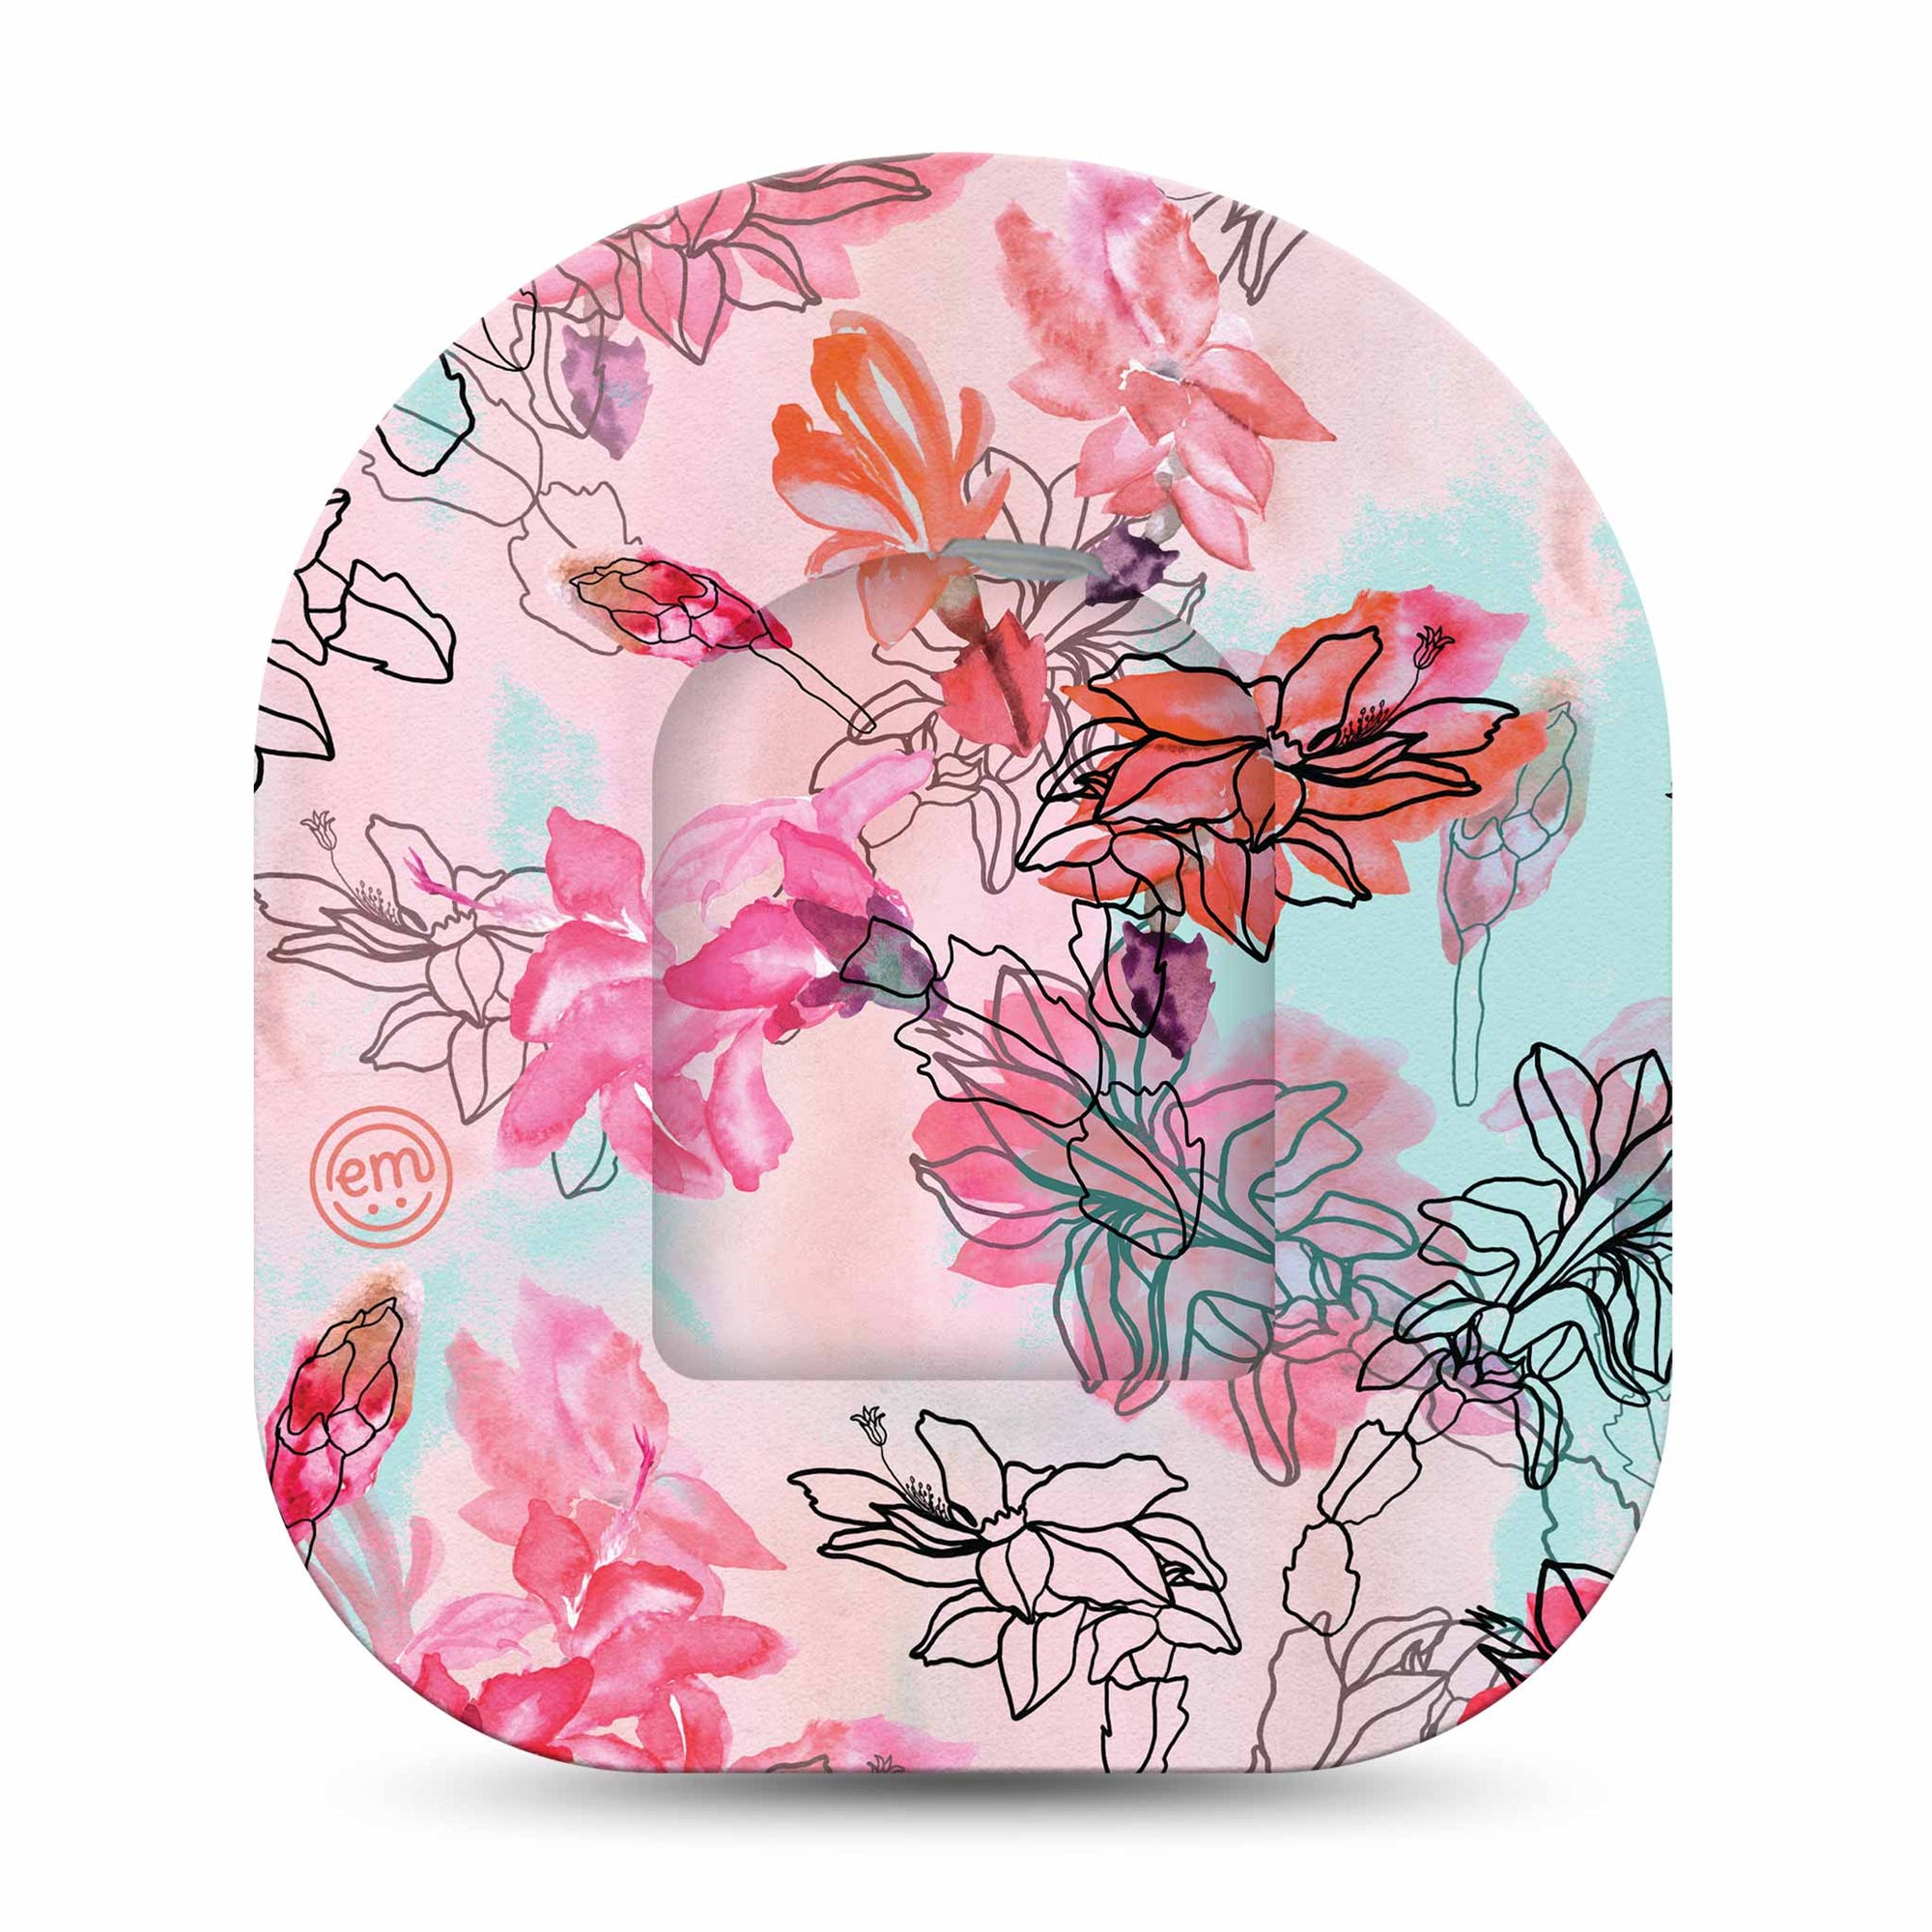 ExpressionMed Whimsical Blossoms Pod Sticker